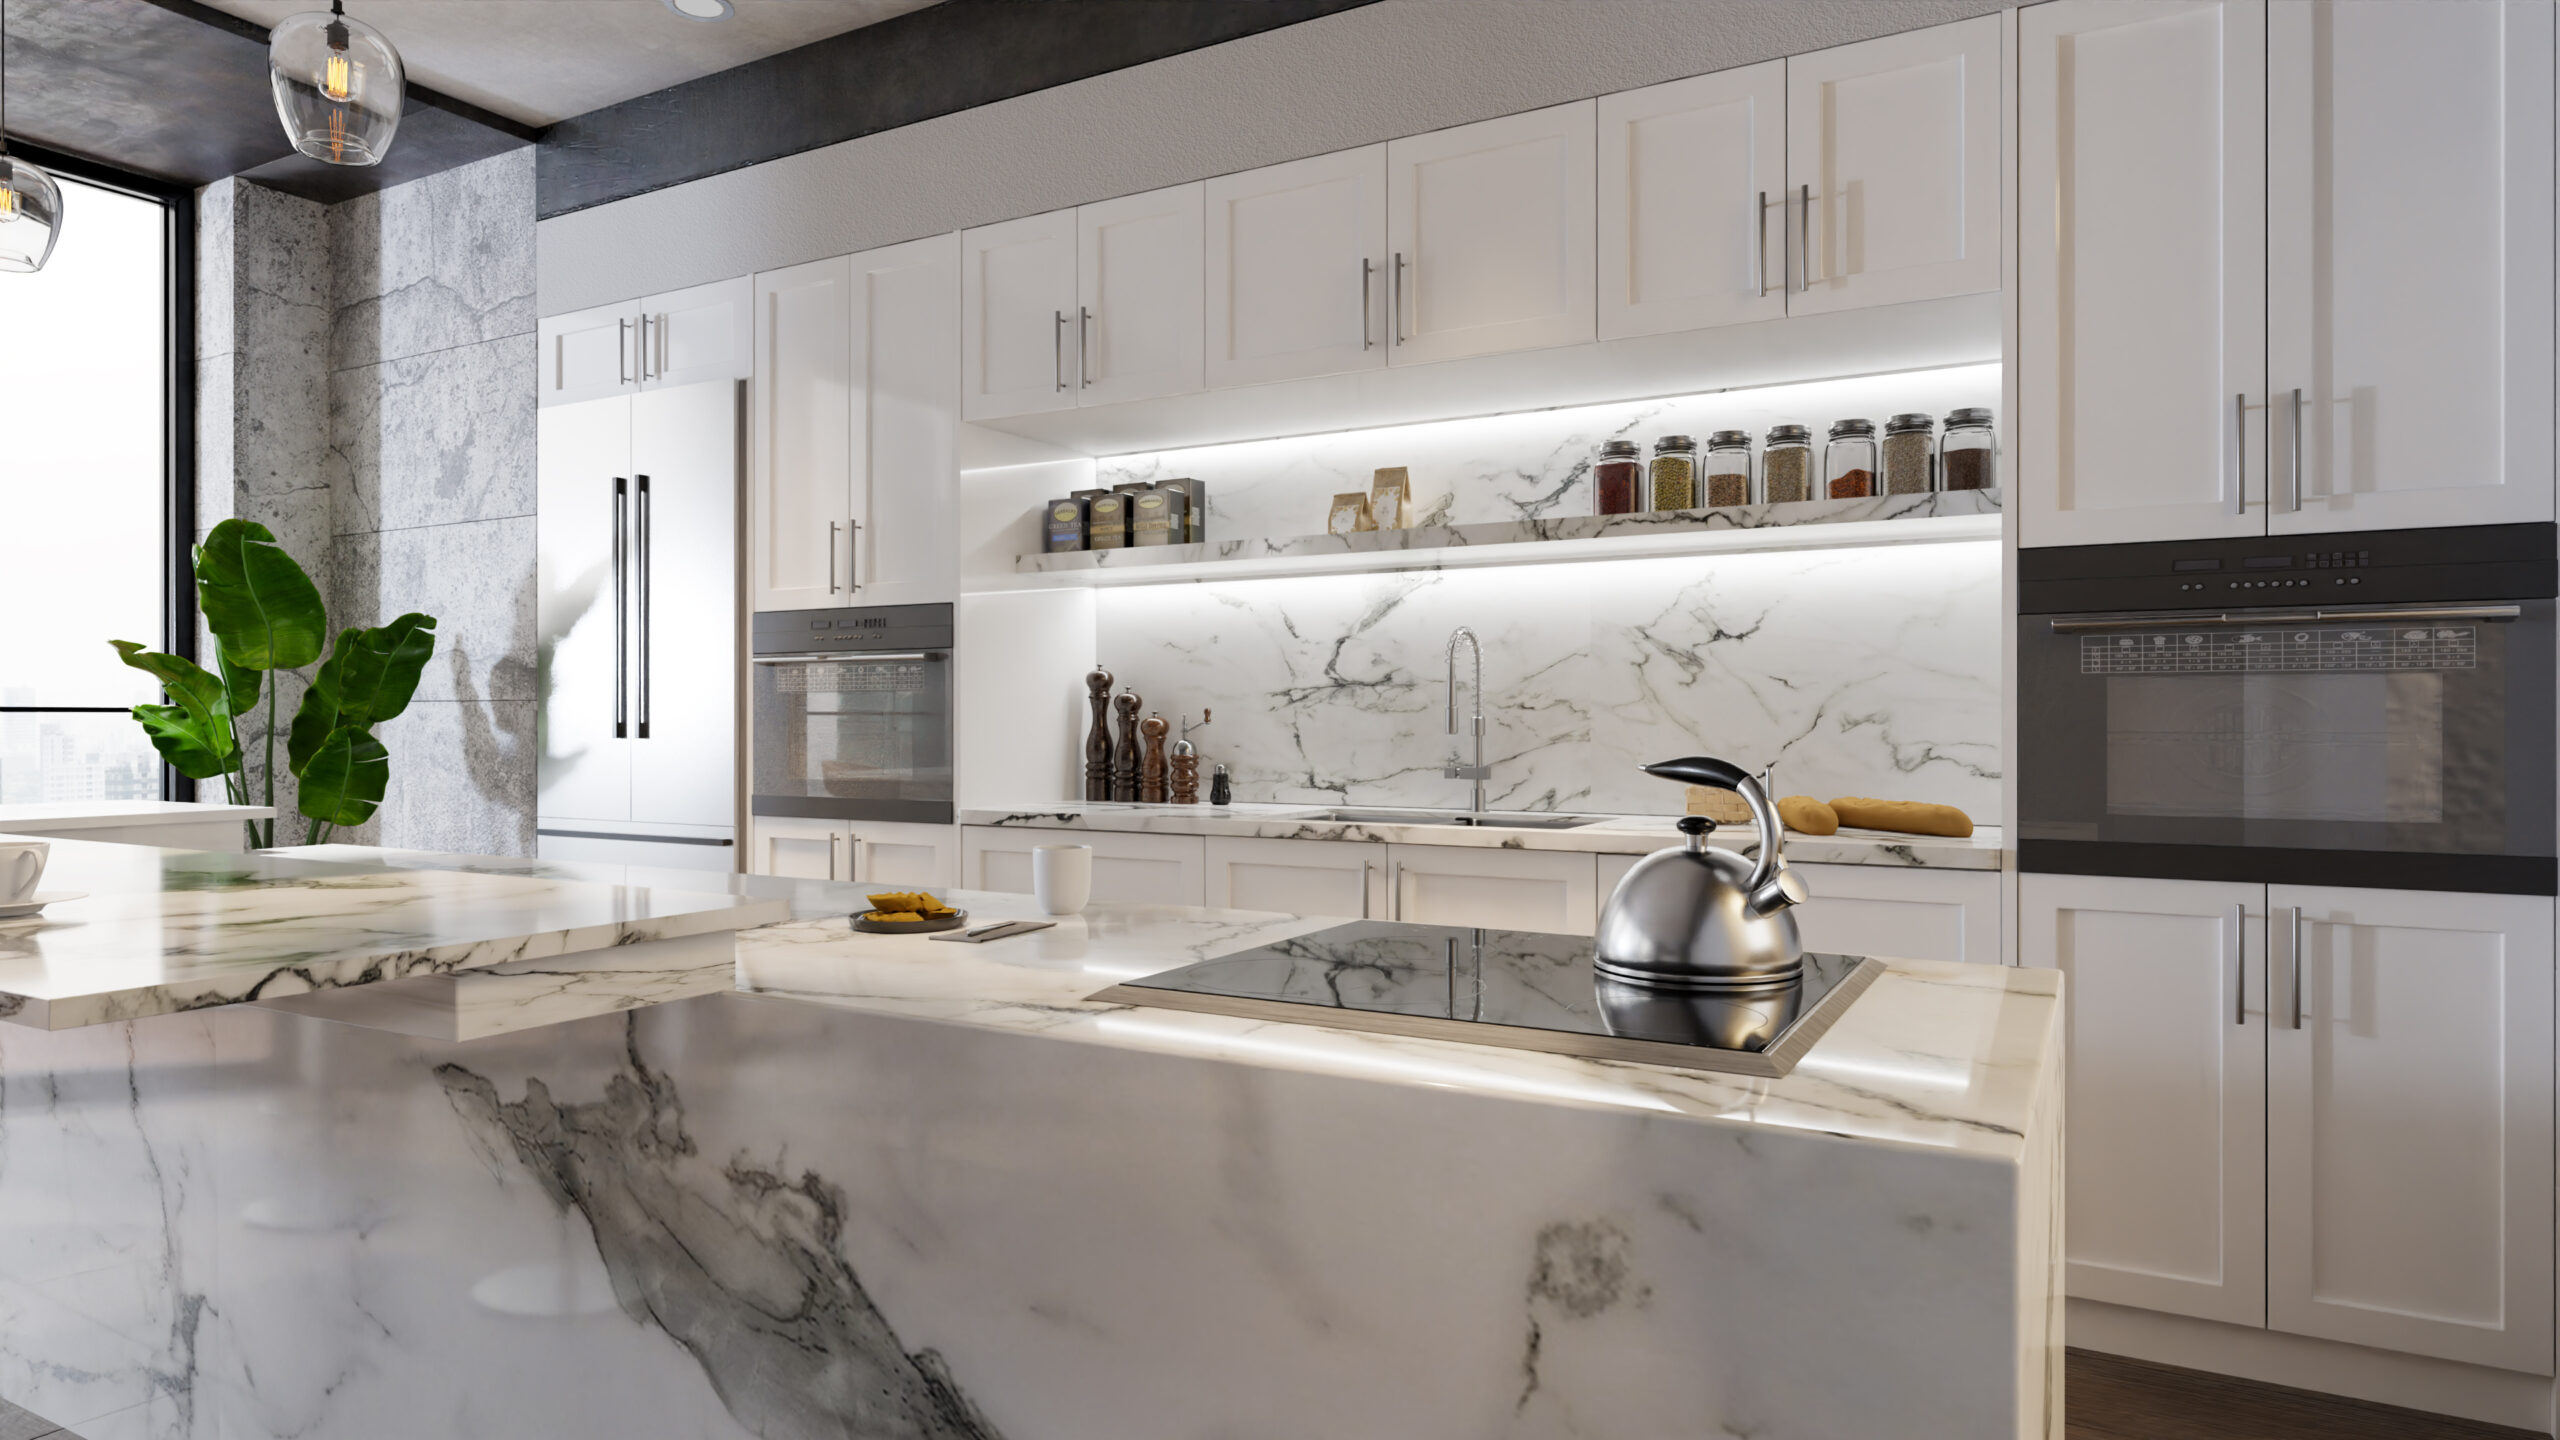 Close-up of clean, modern kitchen with white and gray marble countertops